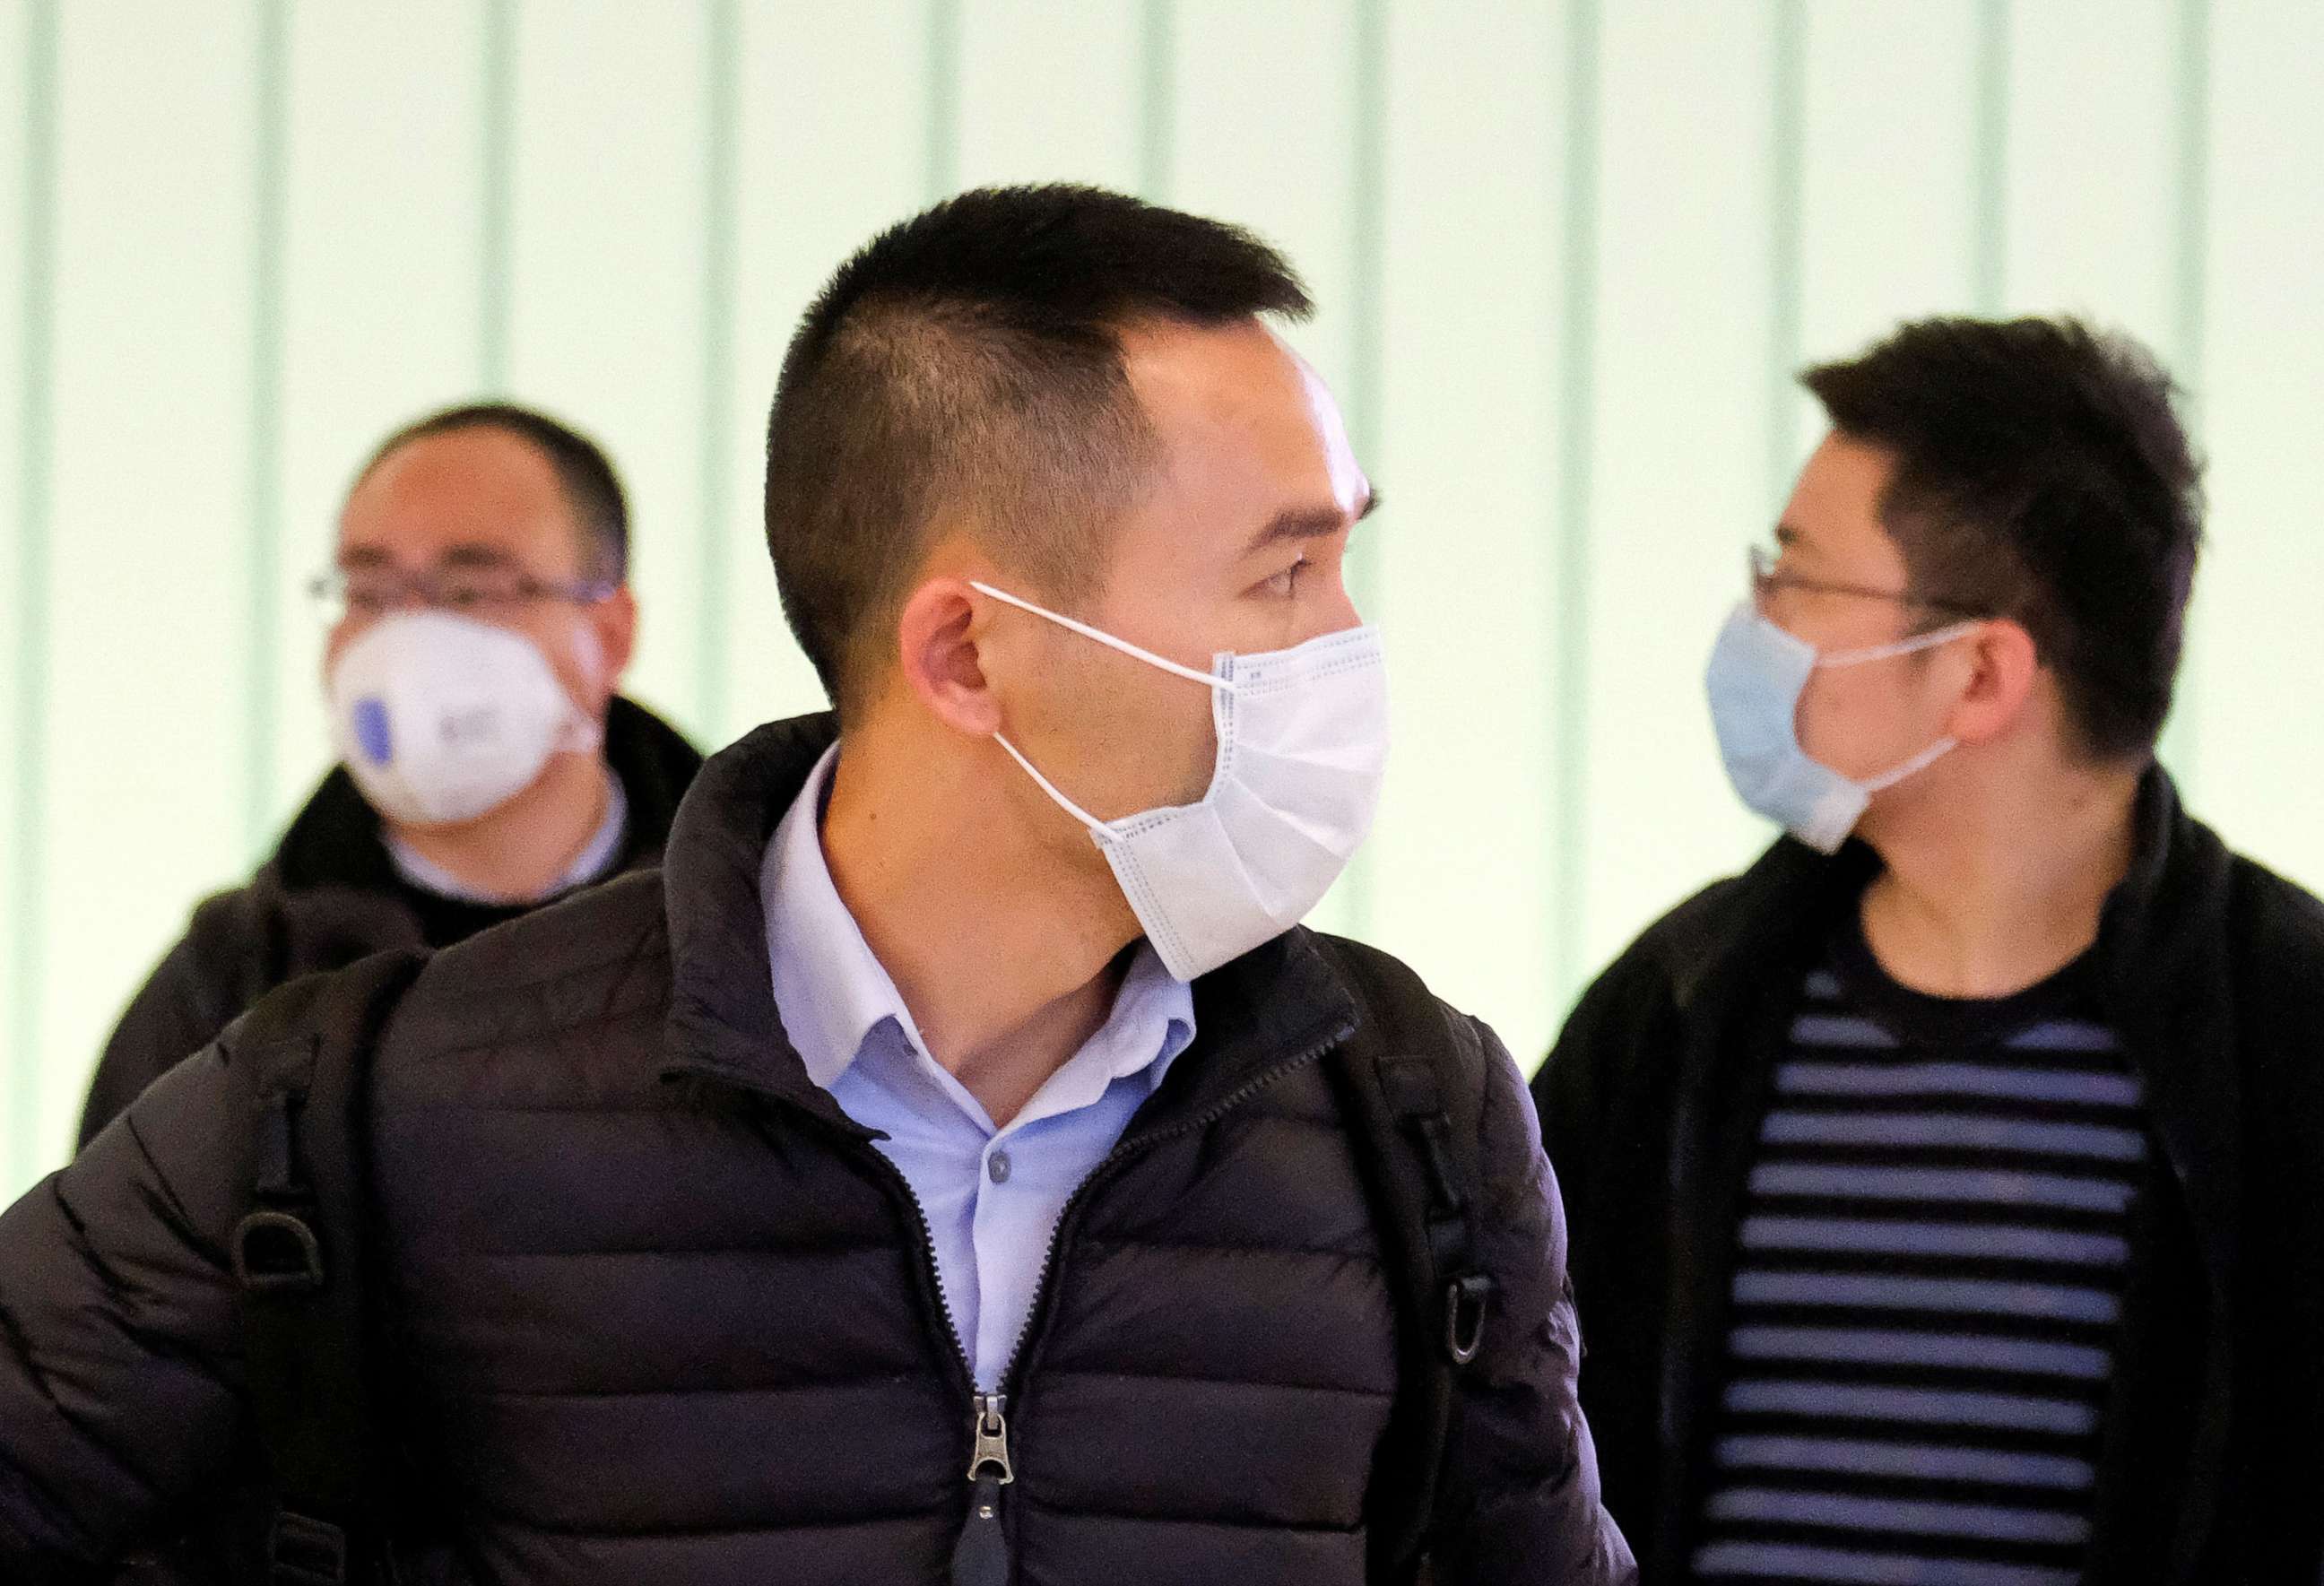 PHOTO: Passengers arrive at LAX from Shanghai, China, after a positive case of the coronavirus was announced in the Orange County suburb of Los Angeles, Jan. 26, 2020.